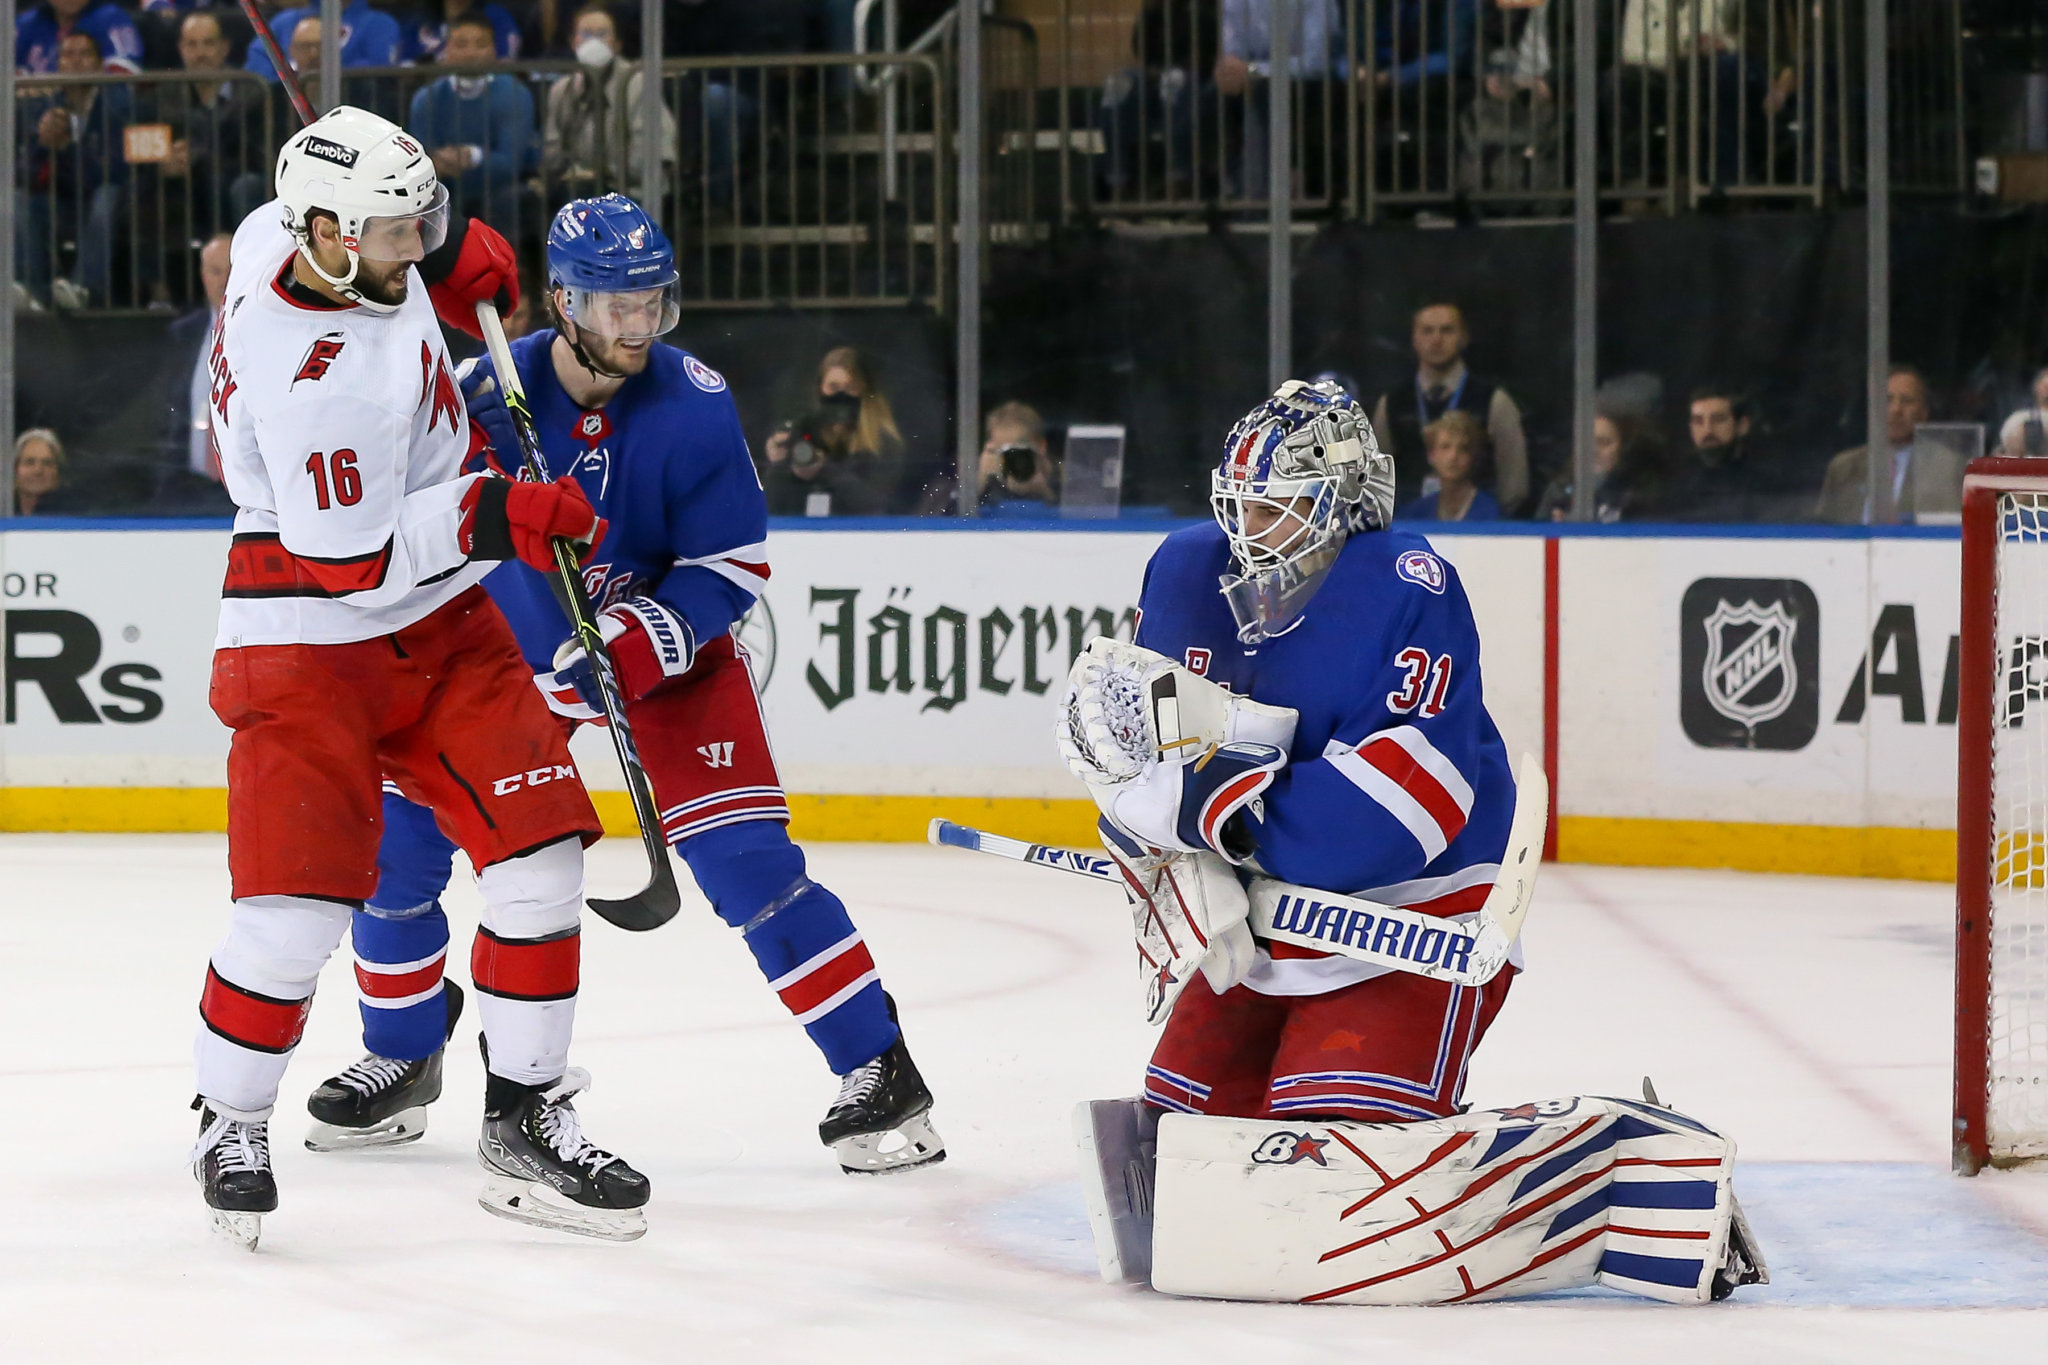 New York Rangers playoff preview: Rangers face Hurricanes